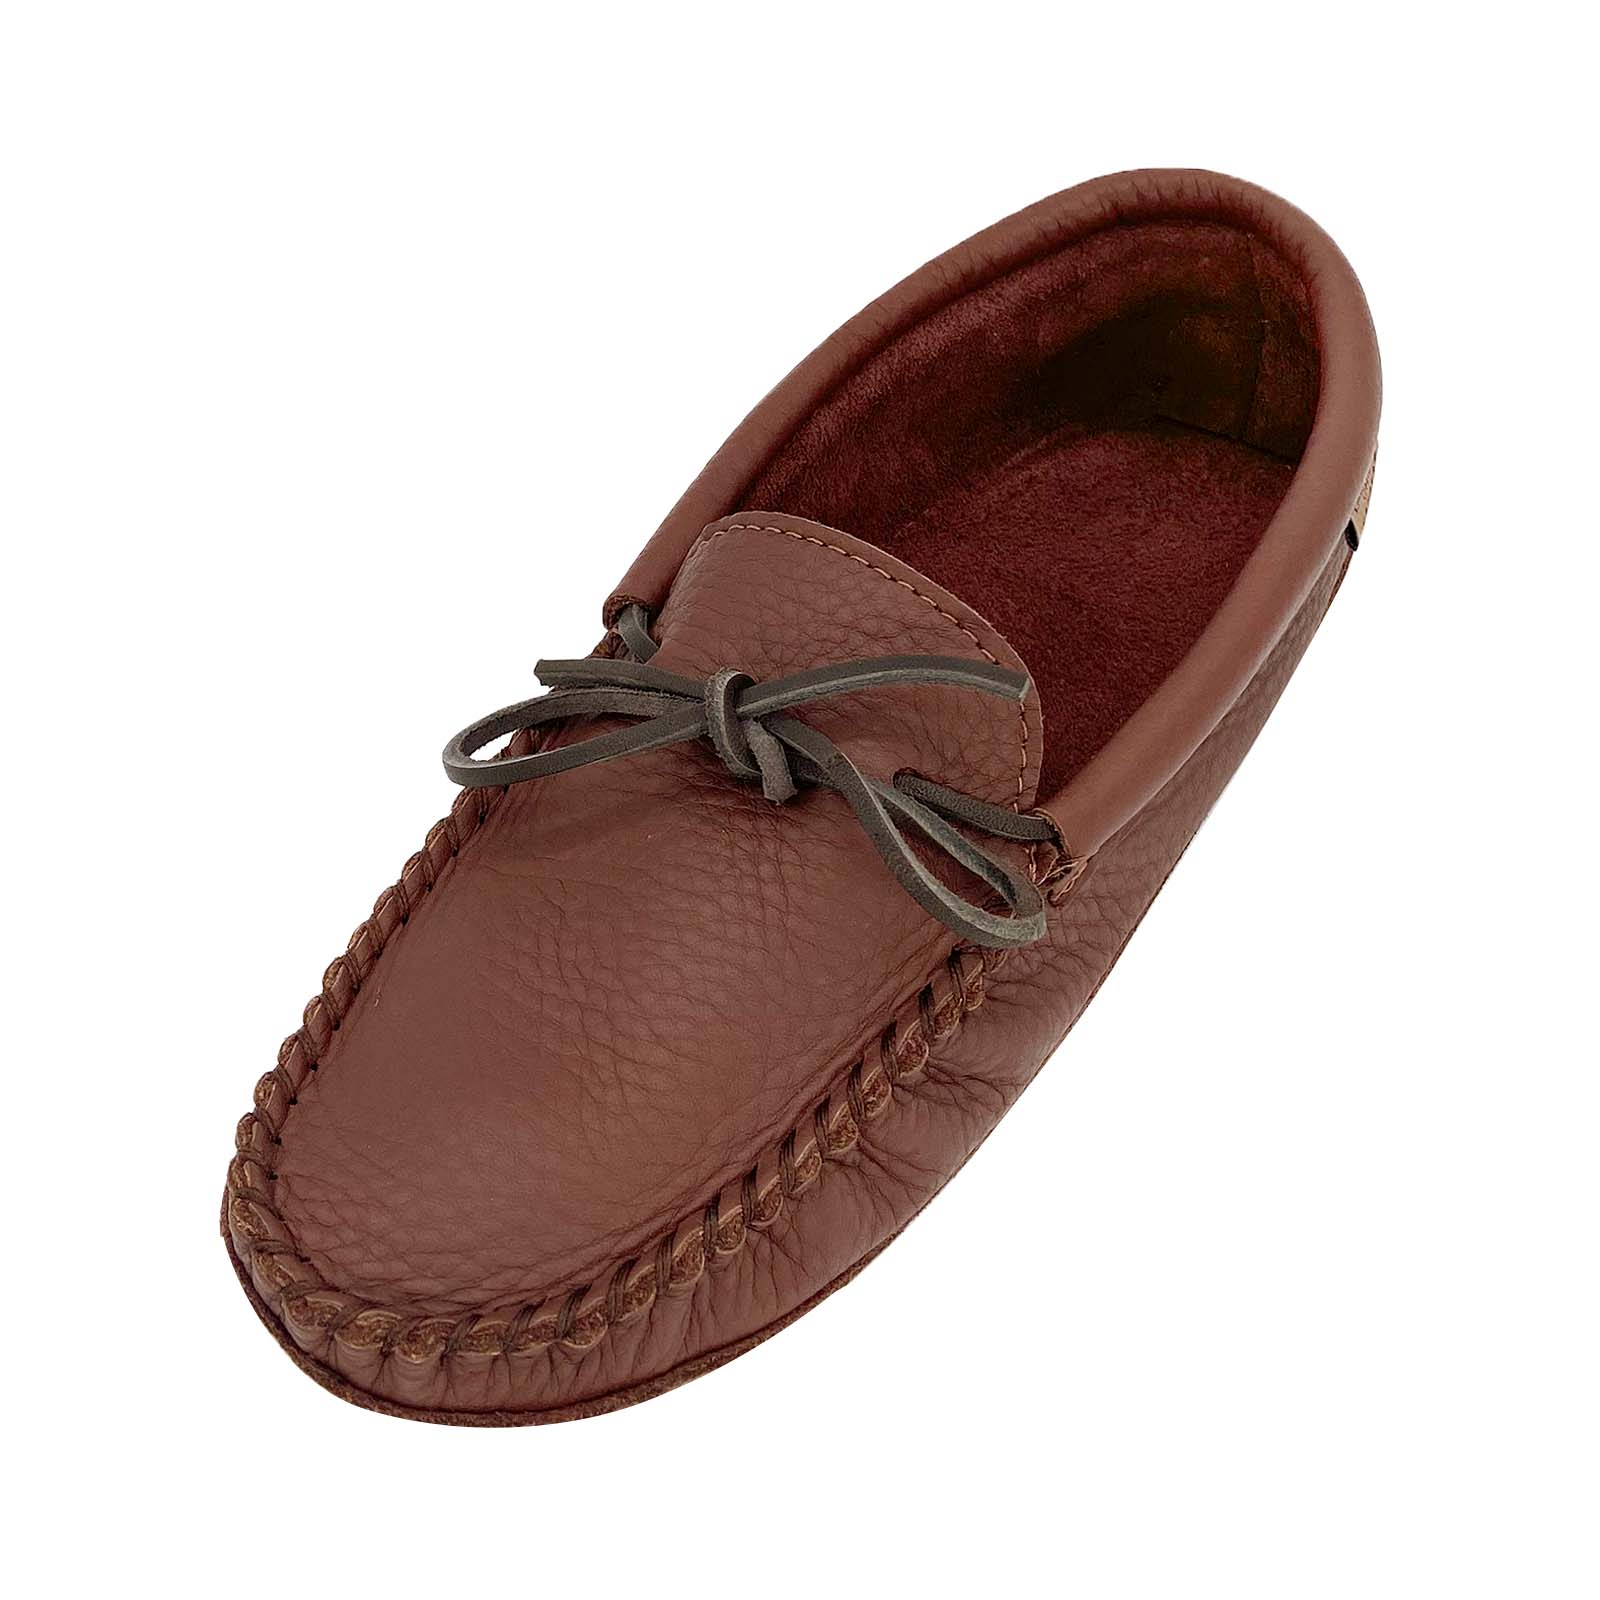 Men's Woodstain Brown Leather Moccasins